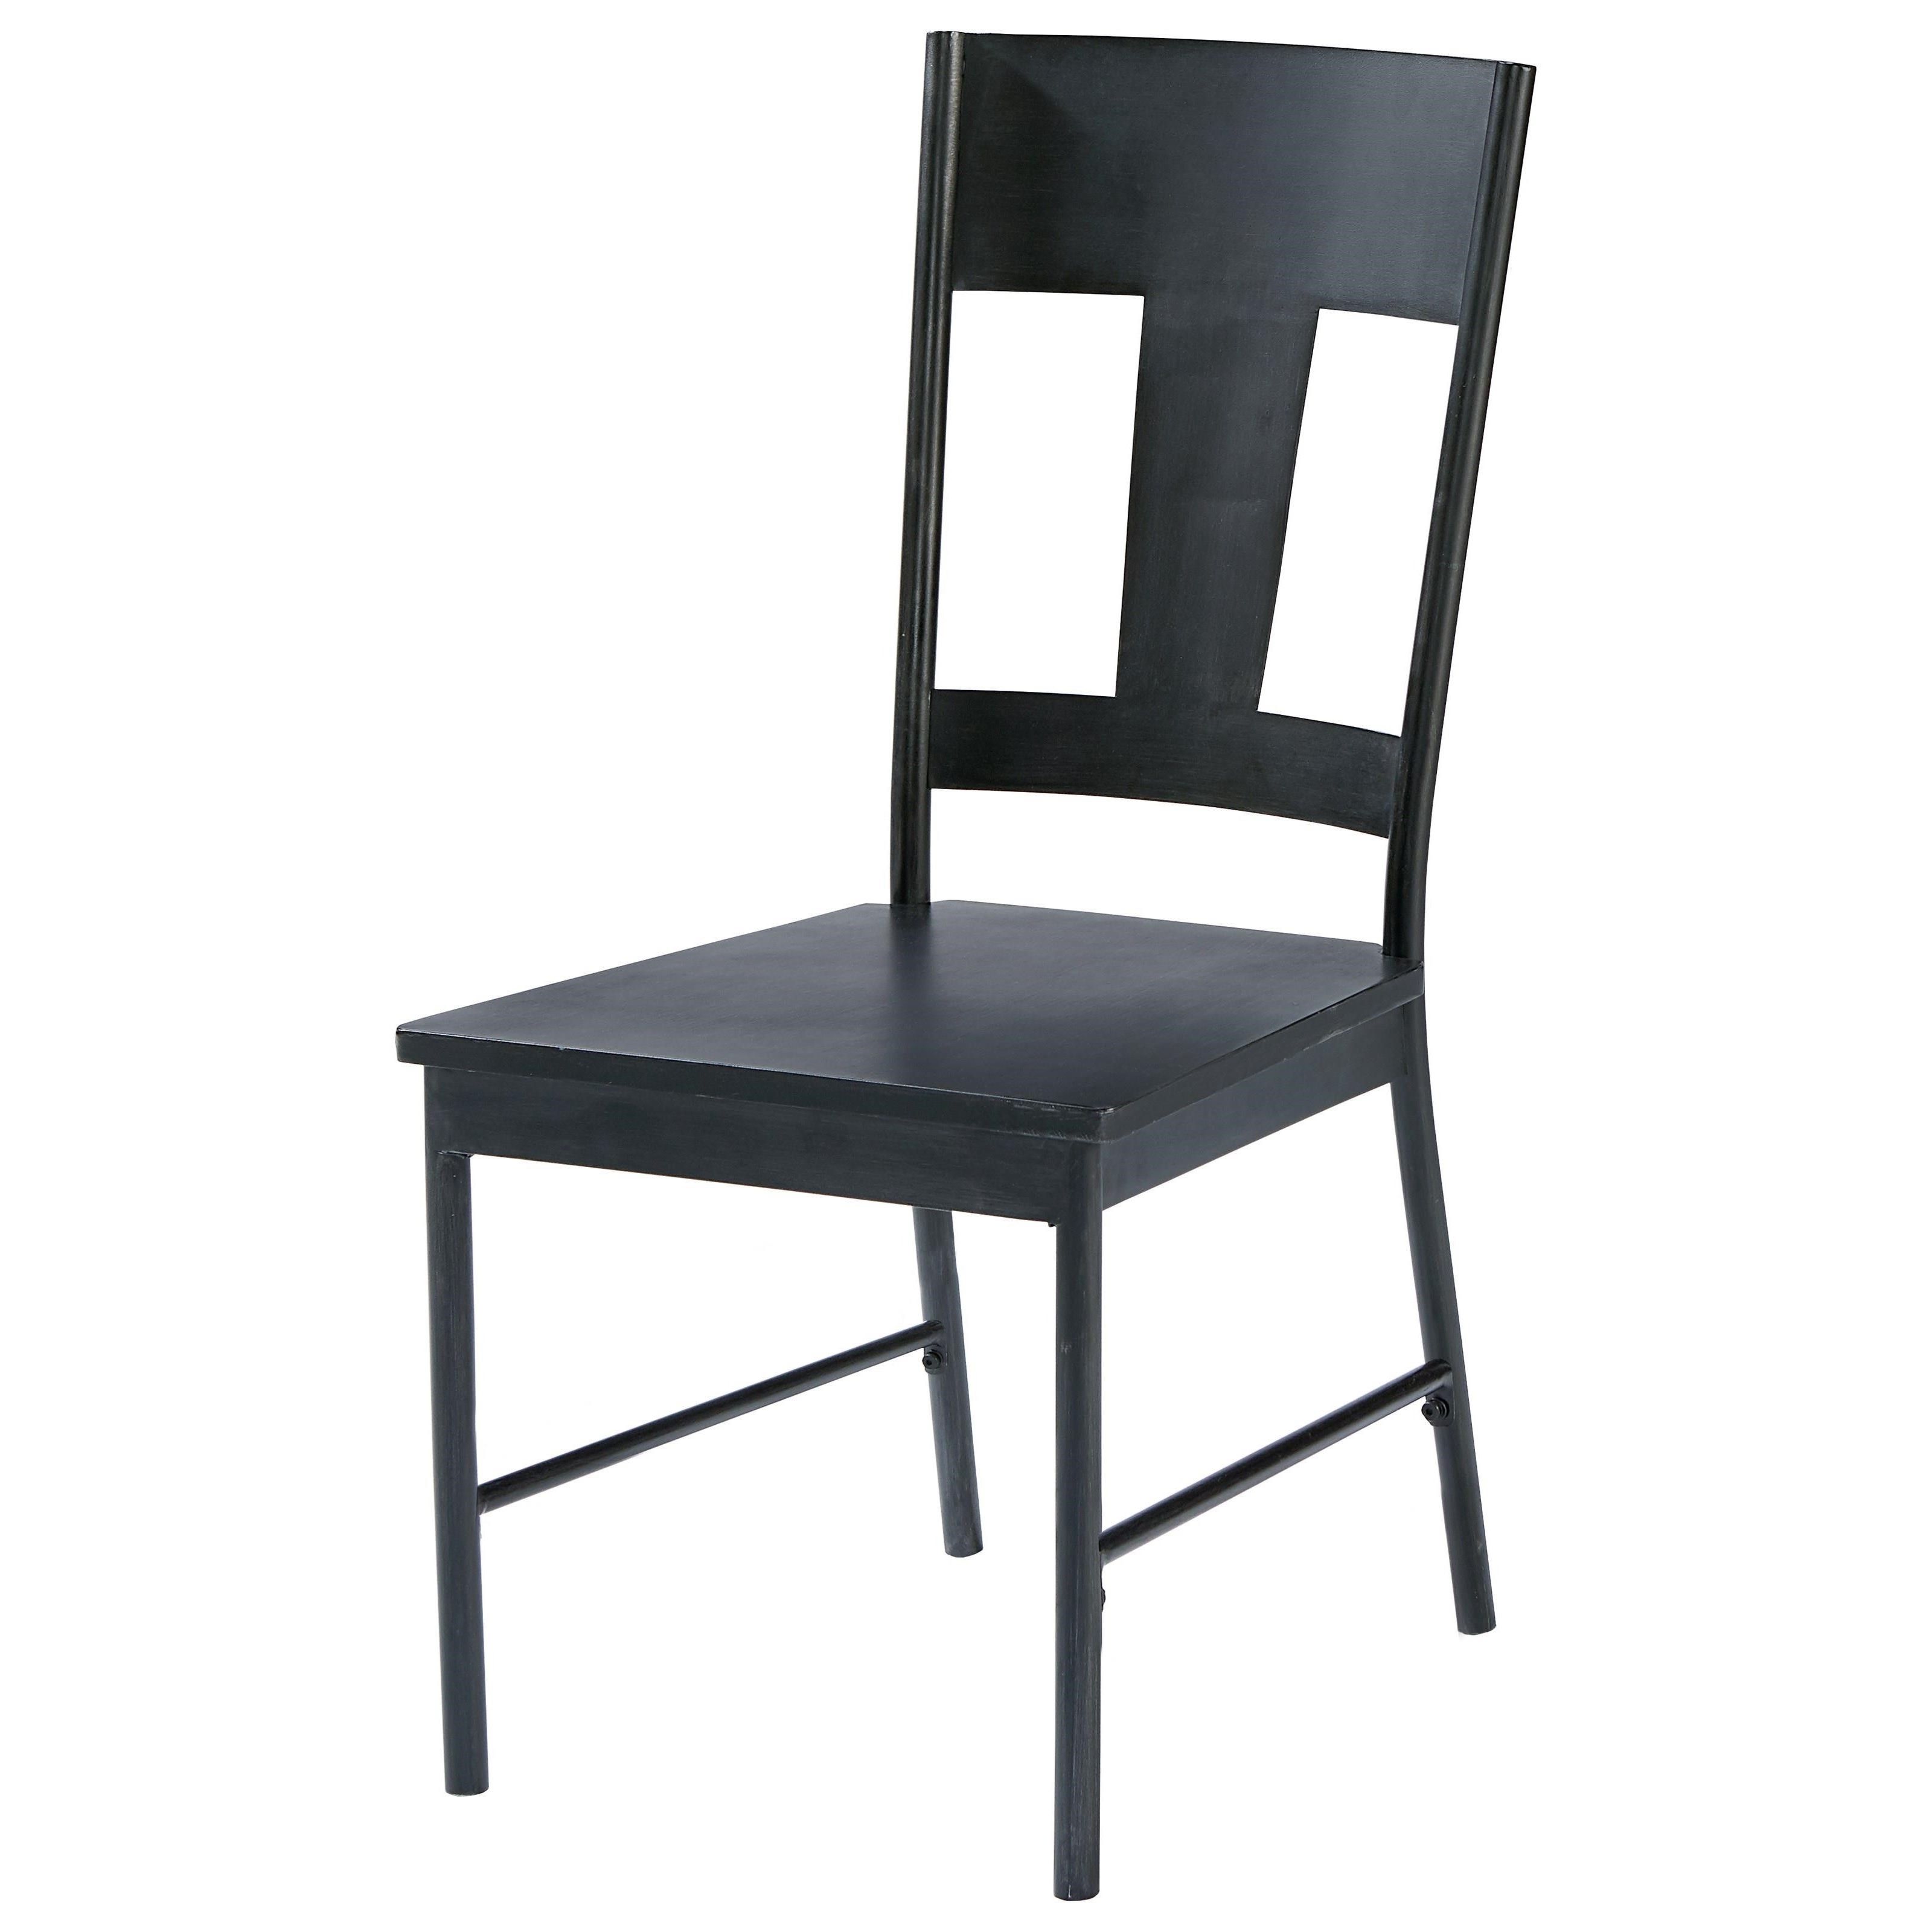 Current Magnolia Home Spindle Back Side Chairs Regarding Magnolia Homejoanna Gaines Industrial 1010904bb Metal Side Chair (View 14 of 20)